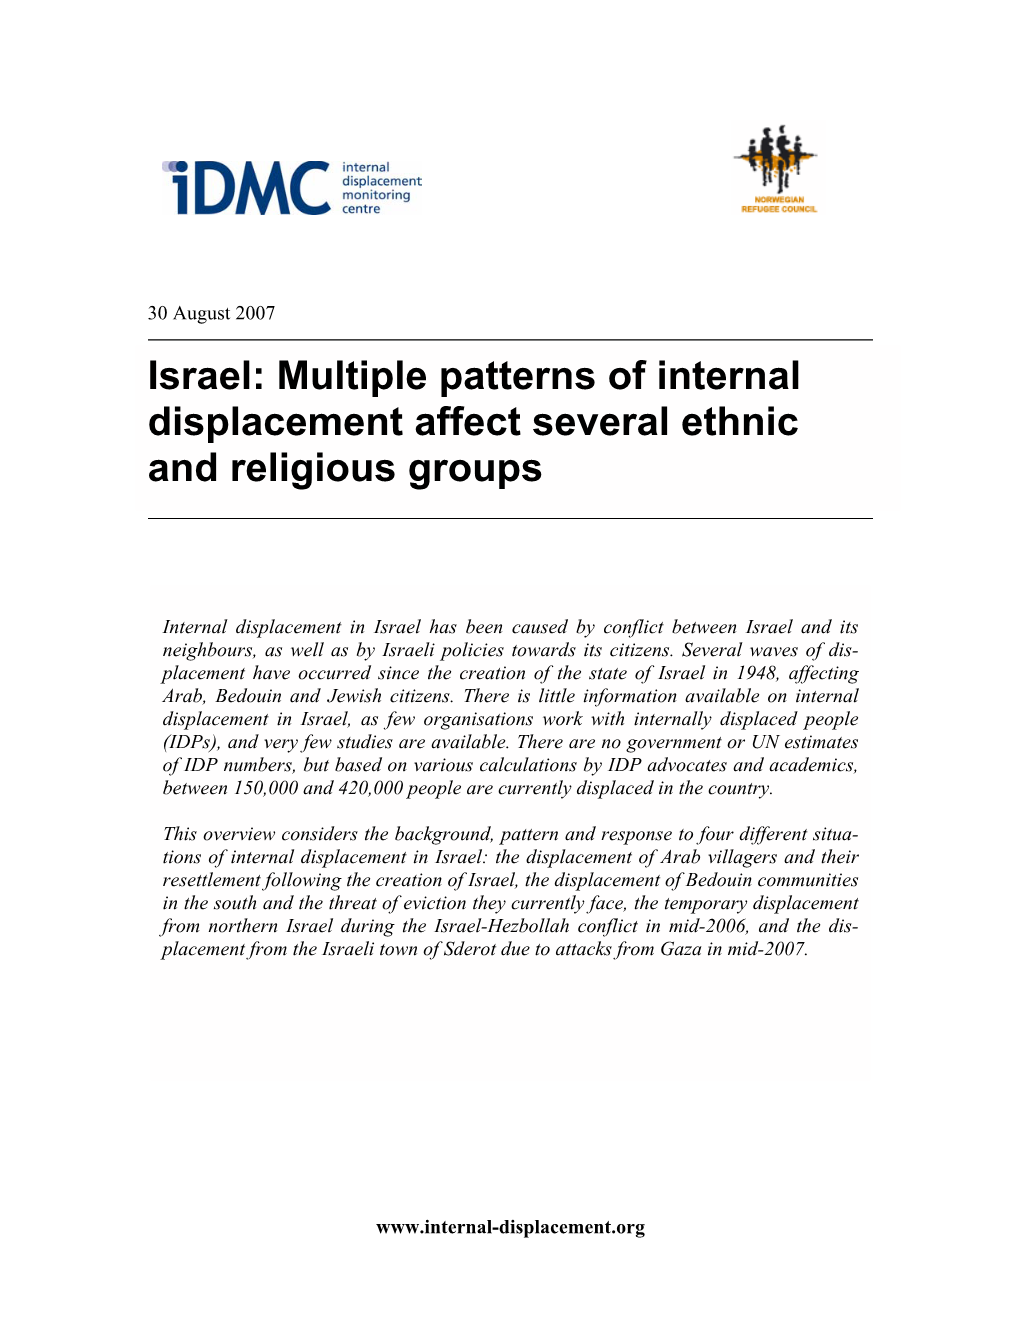 Israel: Multiple Patterns of Internal Displacement Affect Several Ethnic and Religious Groups